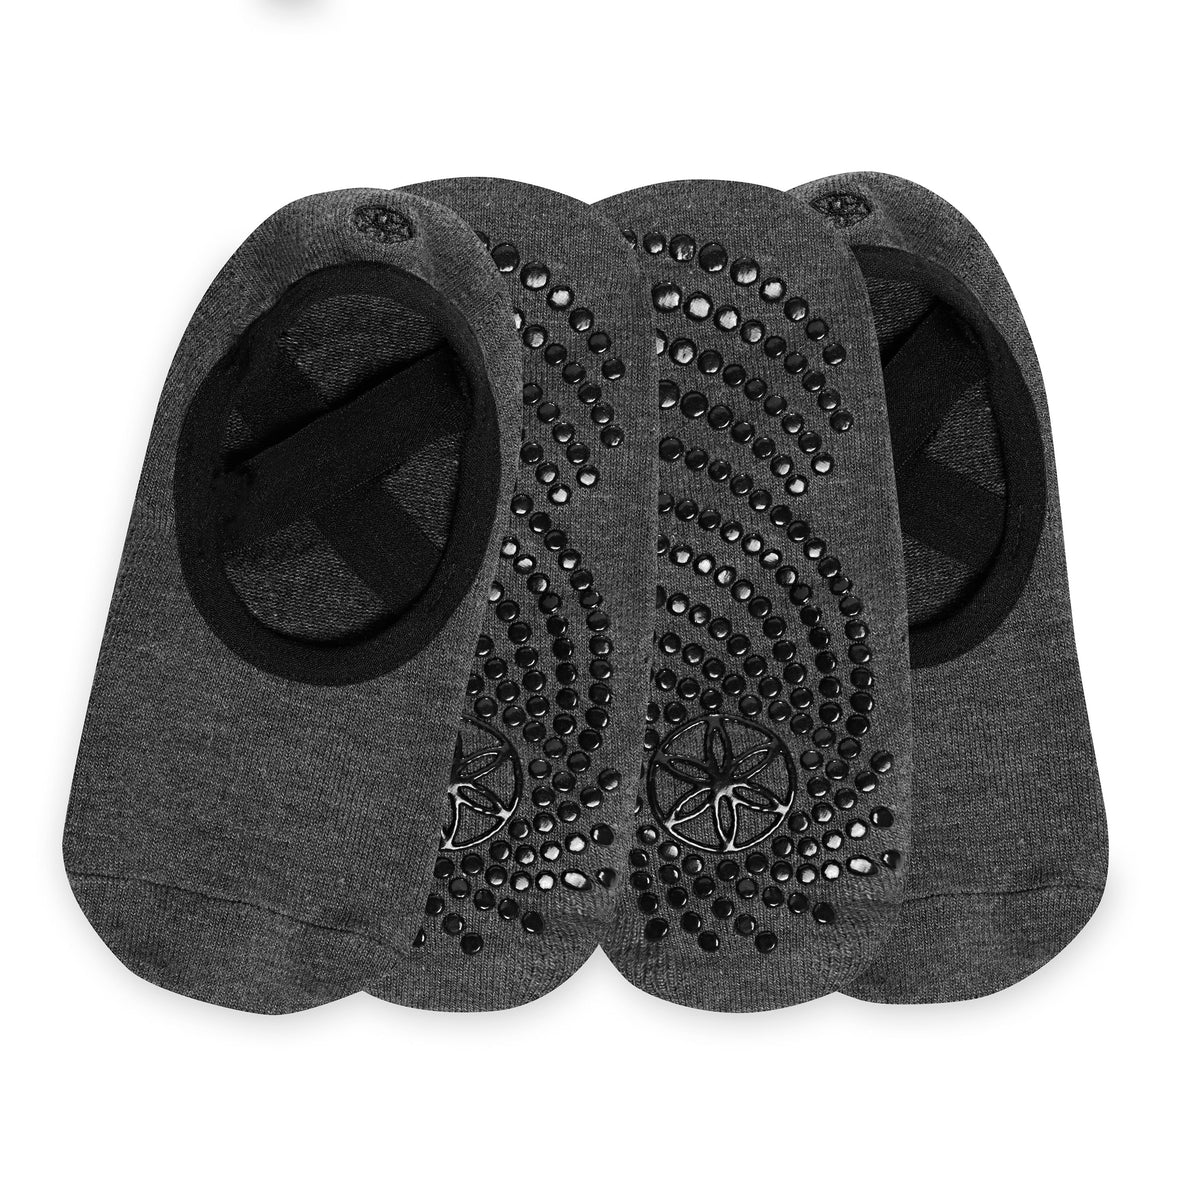  Gaiam Yoga Socks - Toeless Grippy Non Slip Sticky Grip  Accessories for Women & Men - Hot Yoga, Barre, Pilates, Ballet, Dance, Home  - Black/Grey 2-Pack : Clothing, Shoes & Jewelry